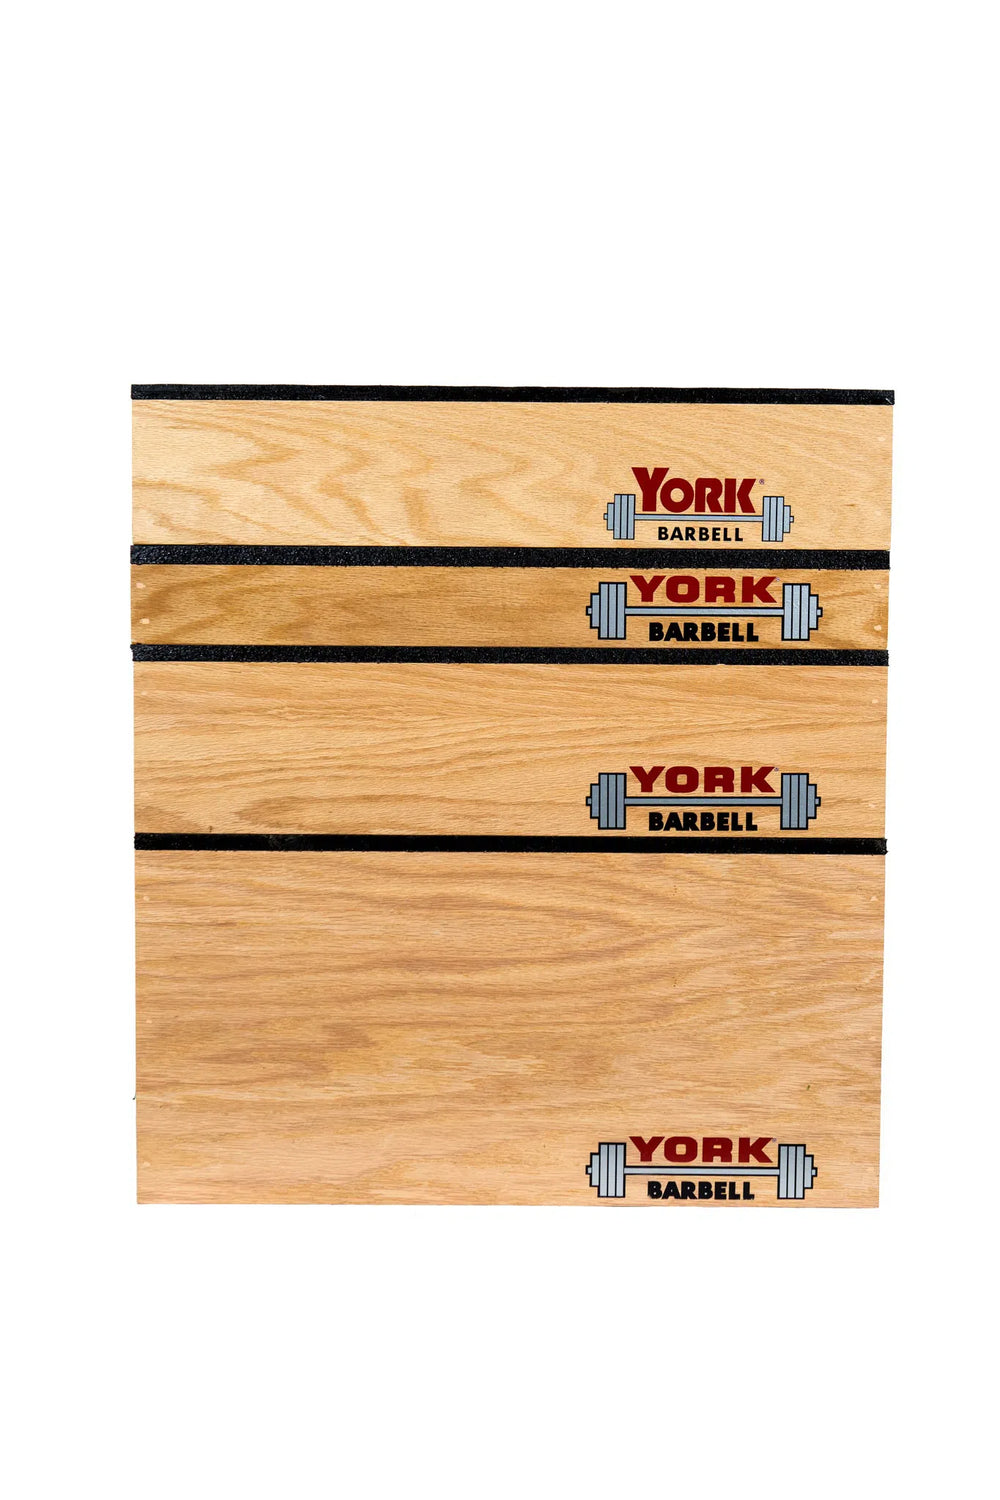 York Barbell Stackable Plyo Step-Up Box 54256-54258 front view